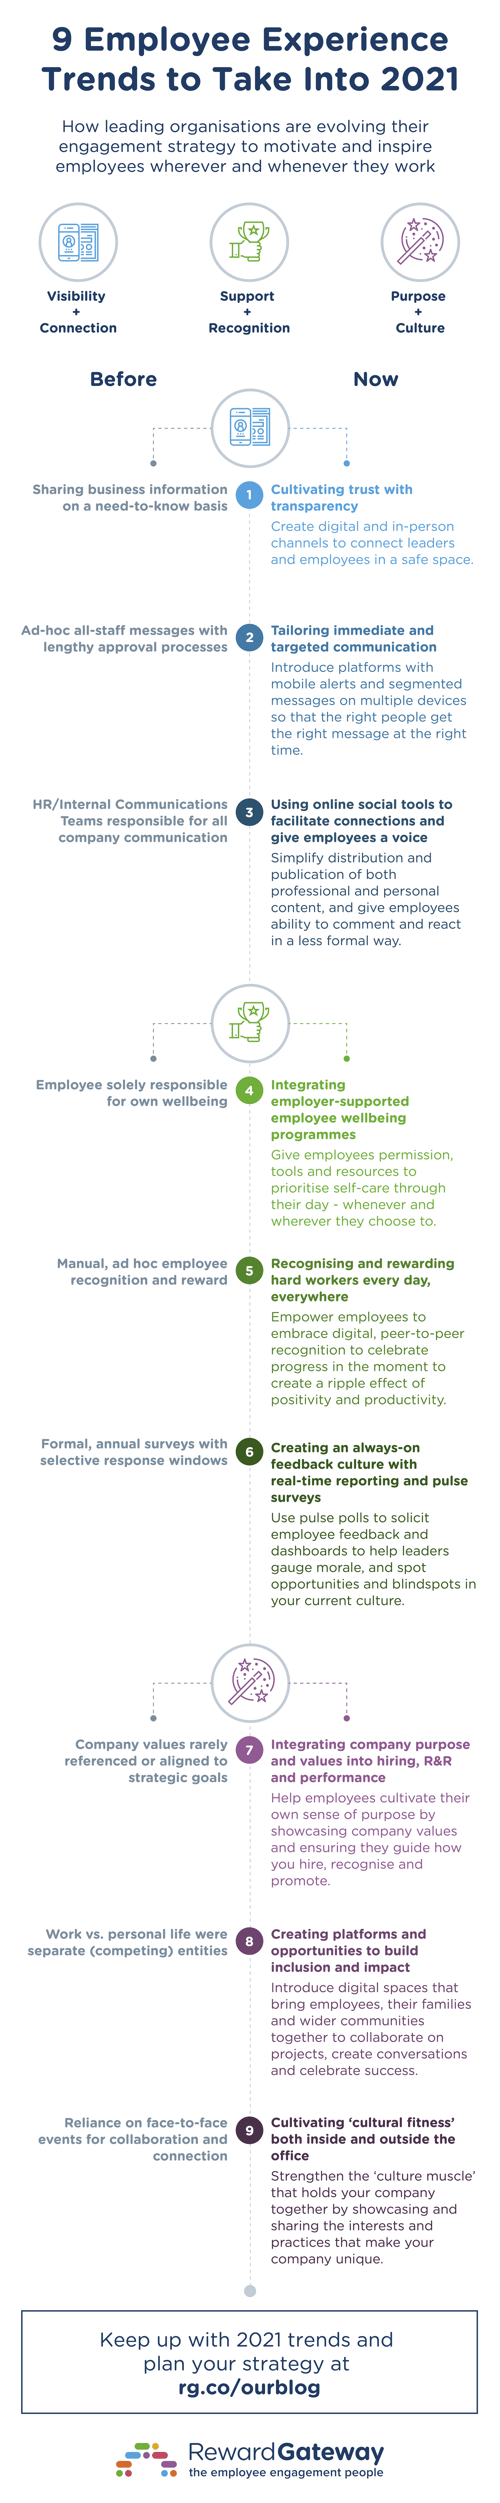 uk-infographic-9-employee-experience-trends-to-take-into-2021